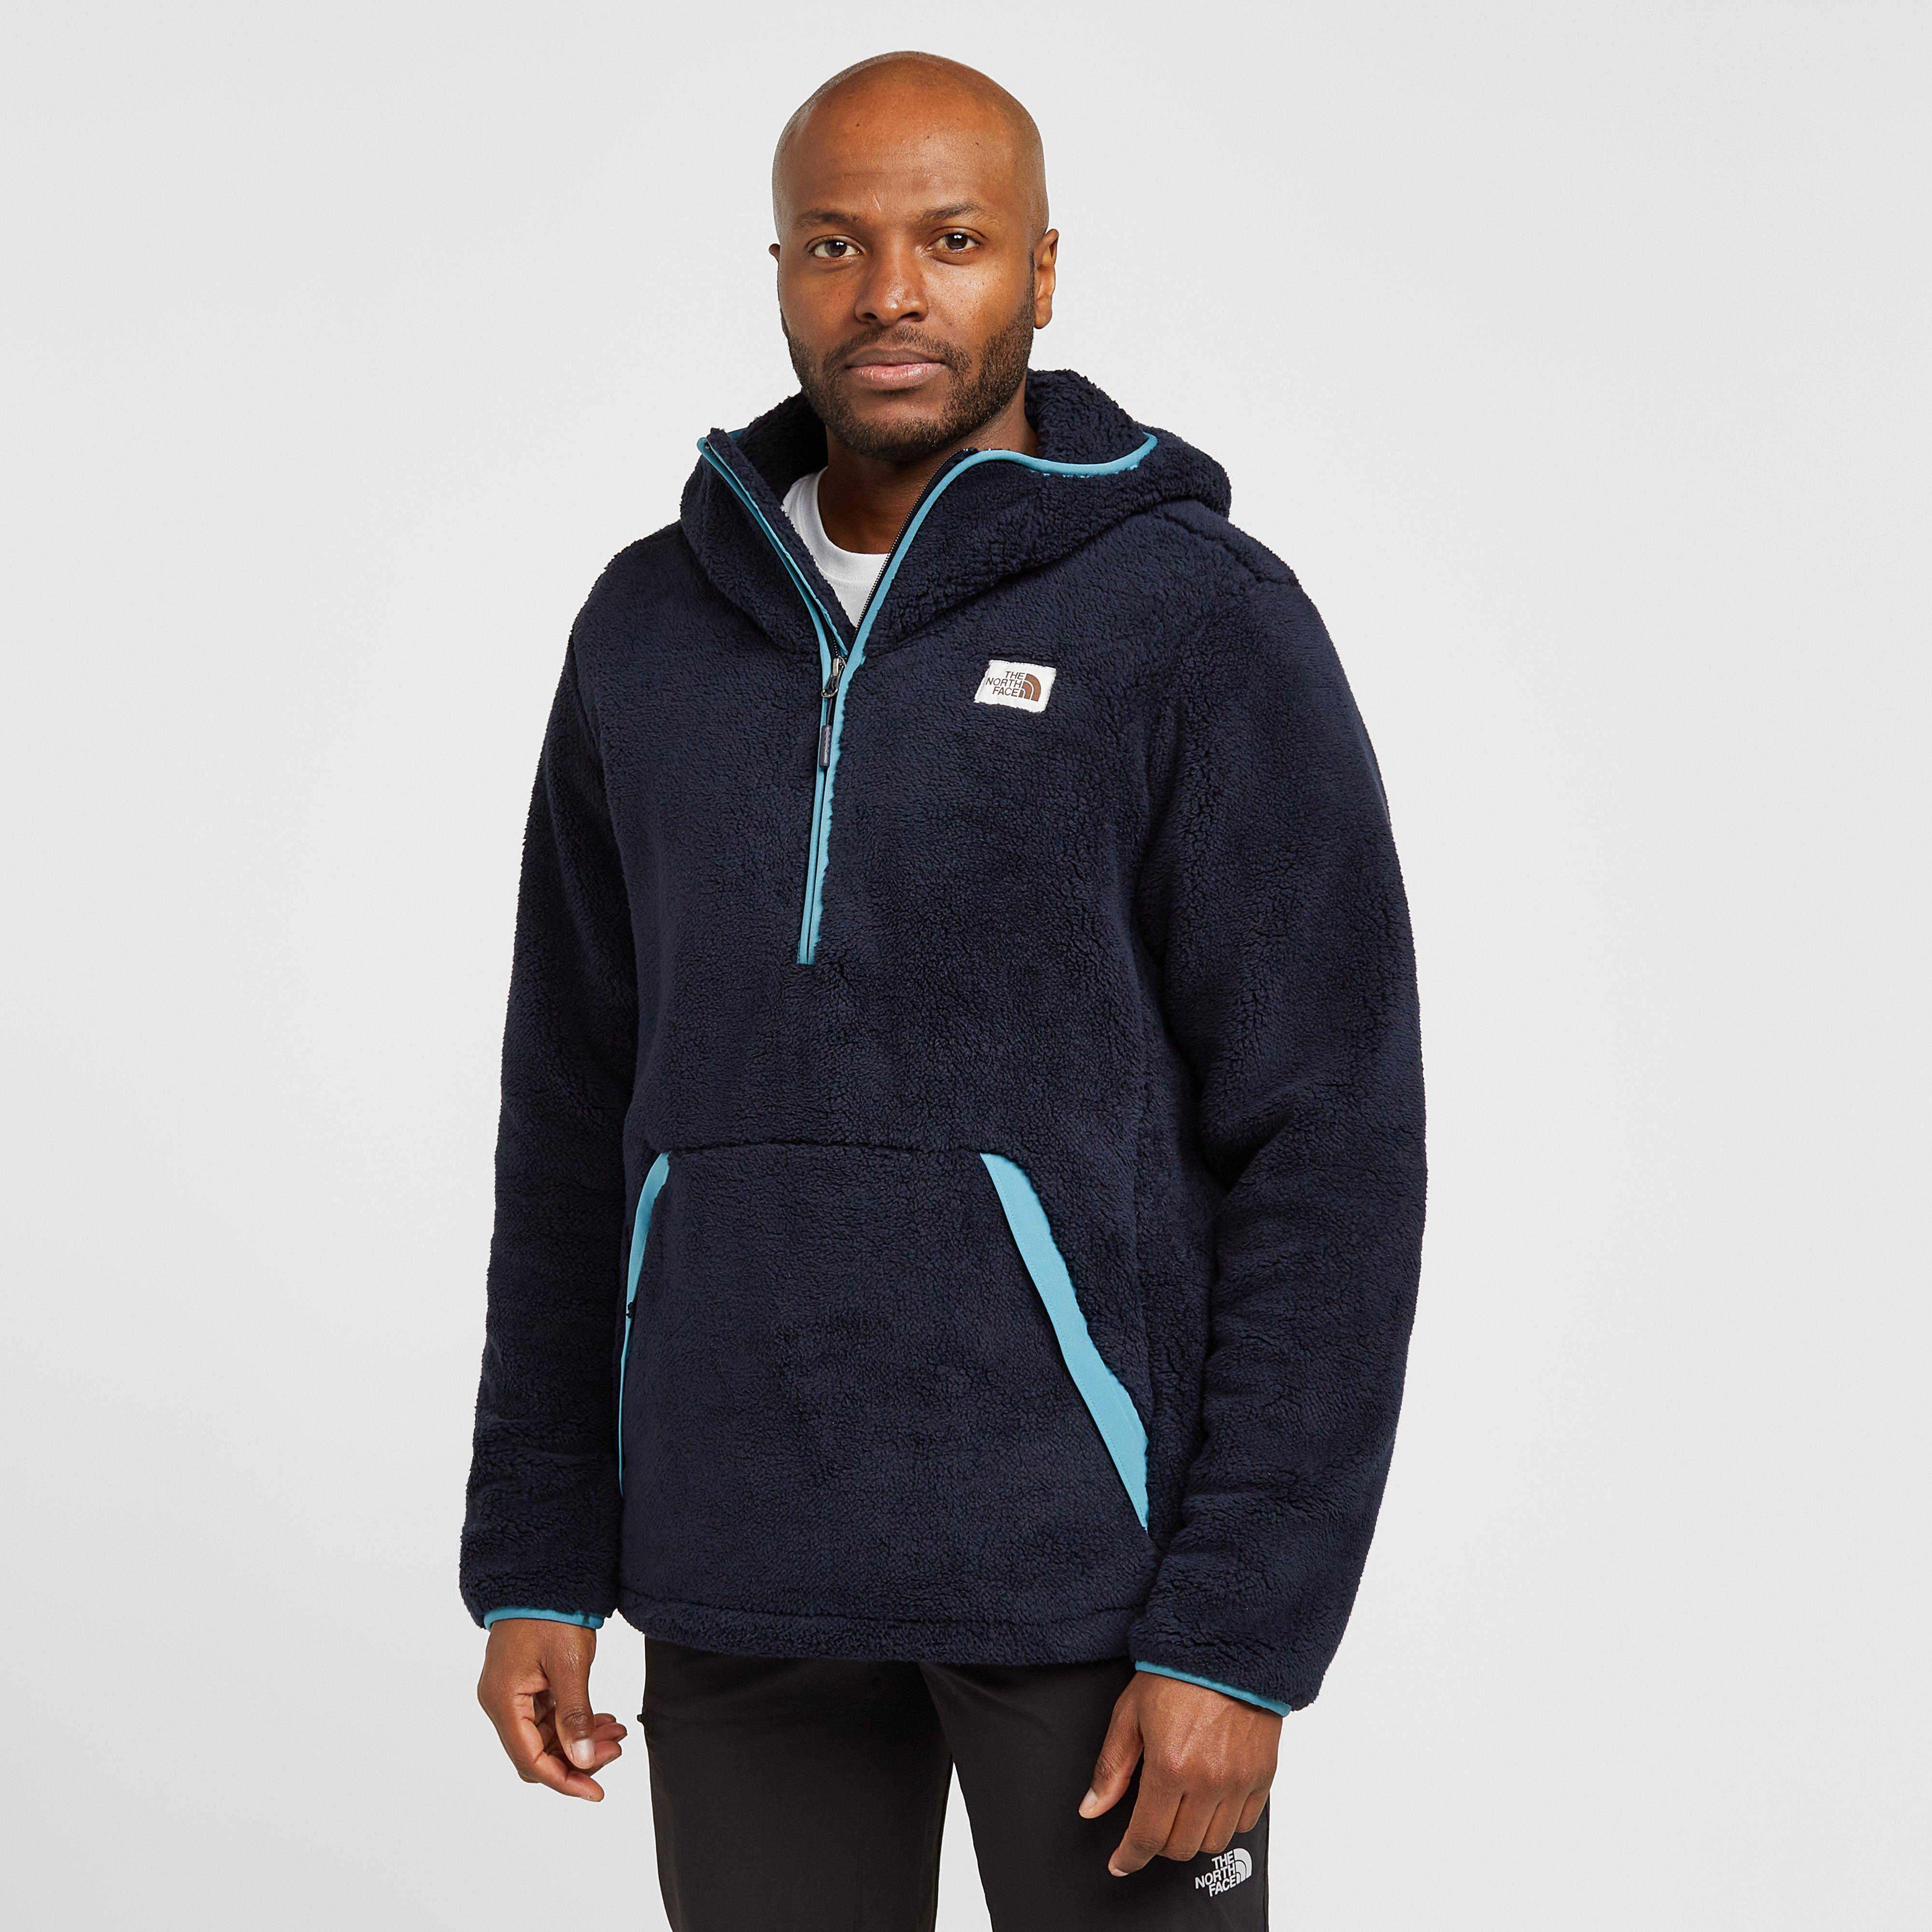 Image of The North Face Men's Campshire Hooded Fleece - Navy/Navy, NAVY/NAVY